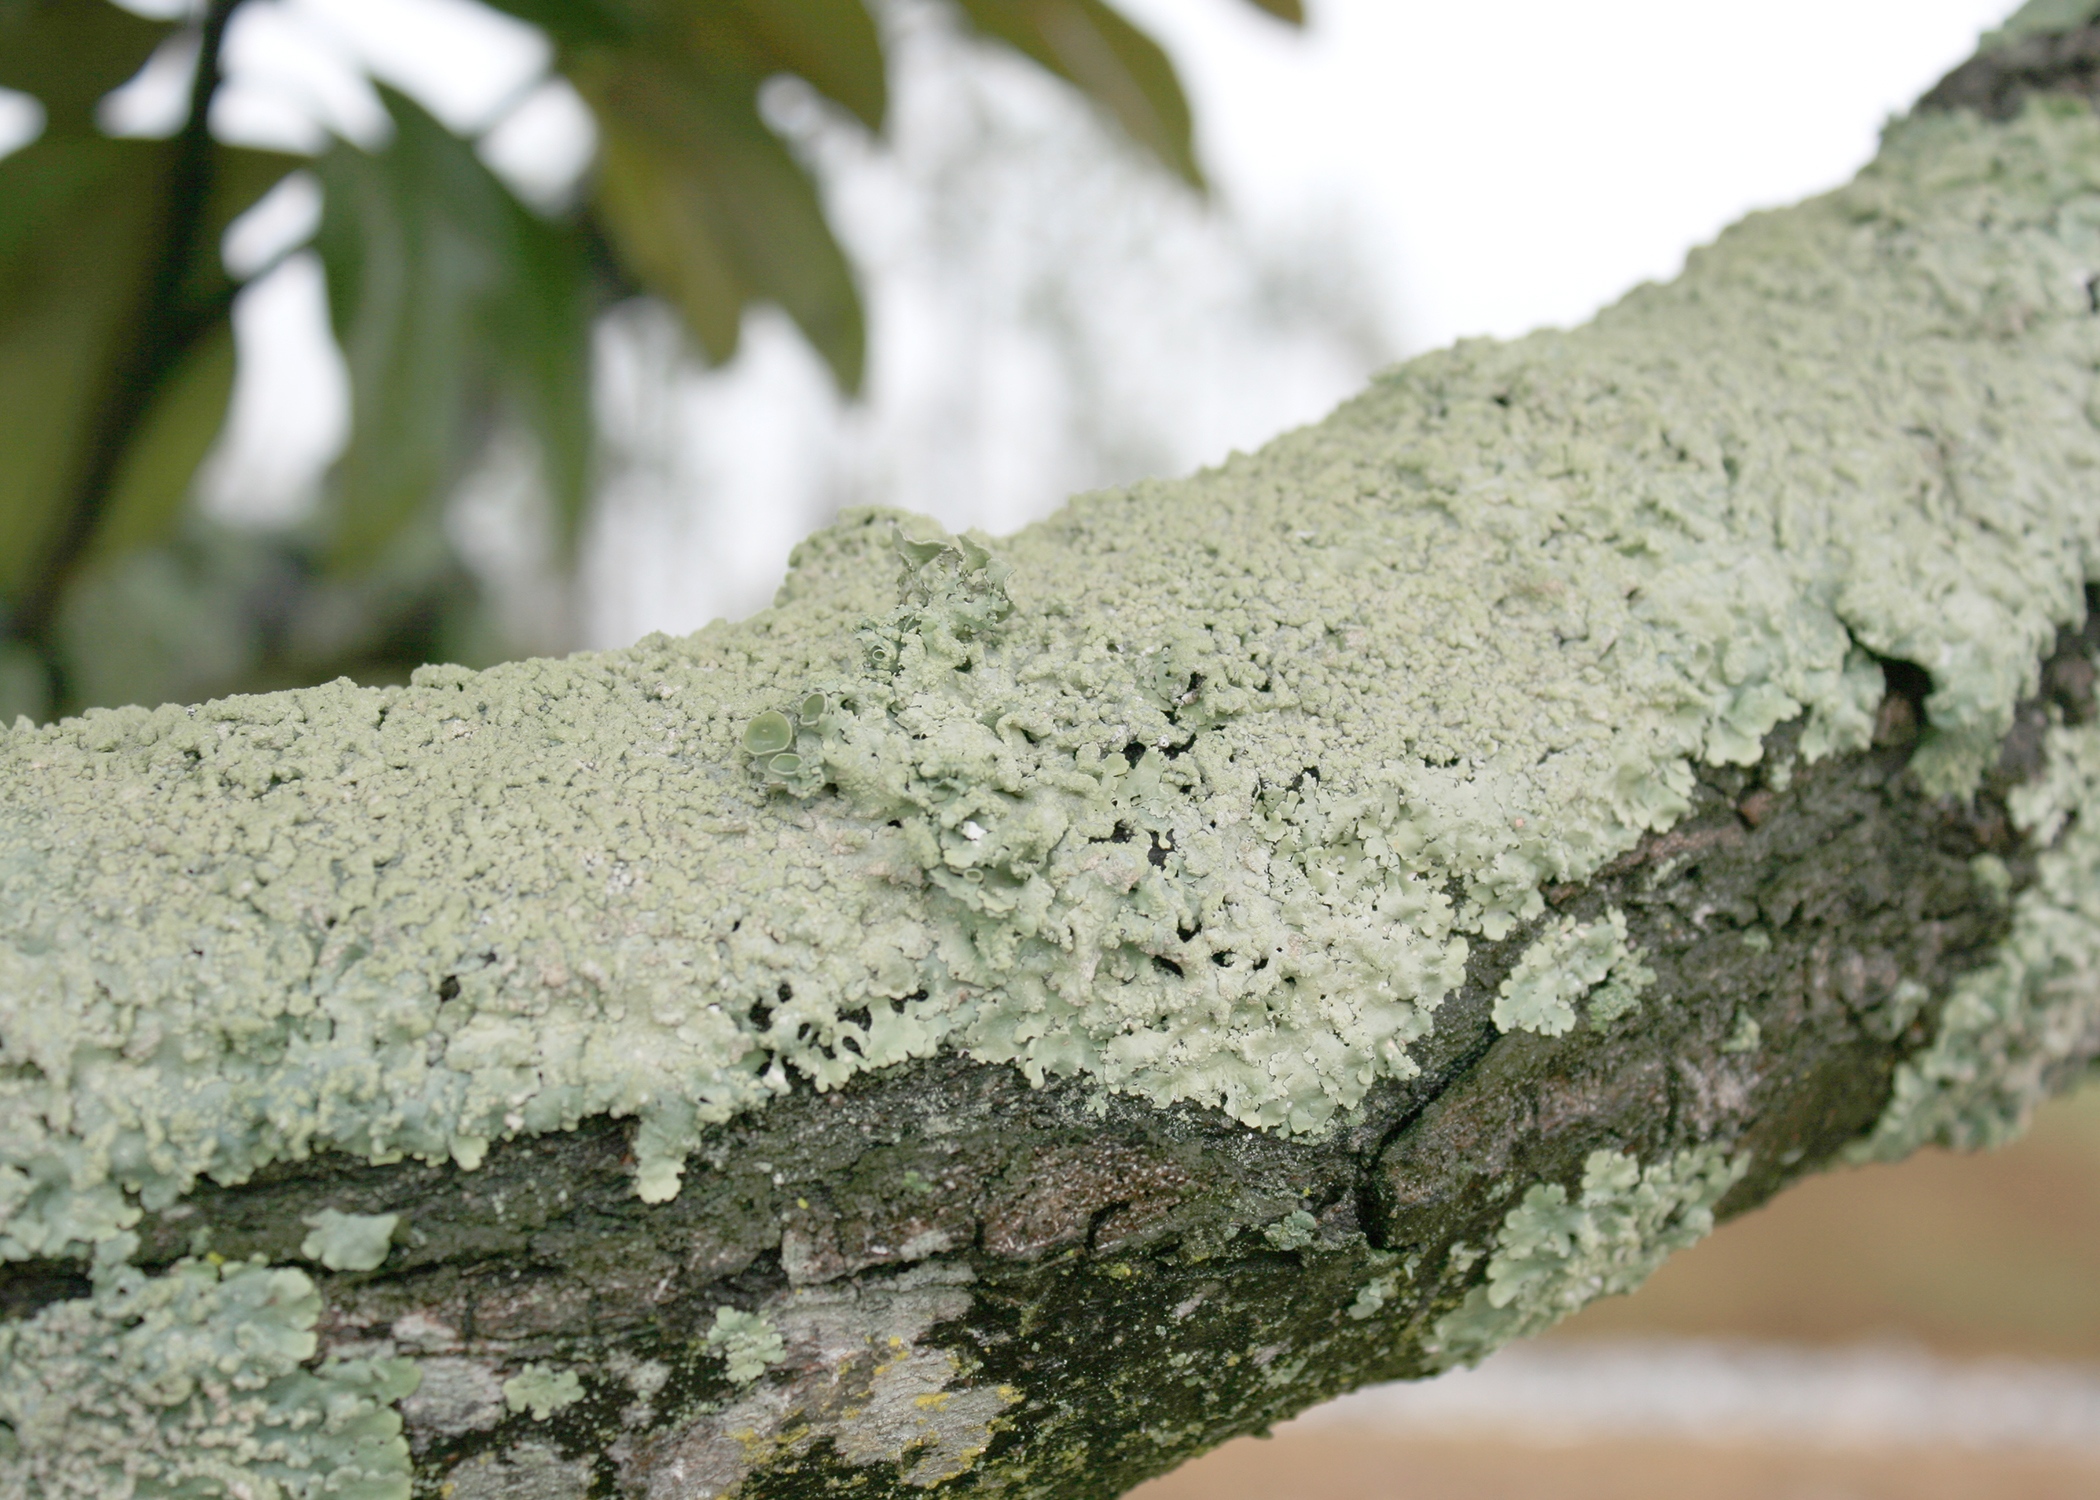 Lichens thrive when environmental stress causes a plant’s canopy to thin out, letting more sunlight into the interior. This is a spreading type of lichen. (Photo by MSU Extension/Gary Bachman)